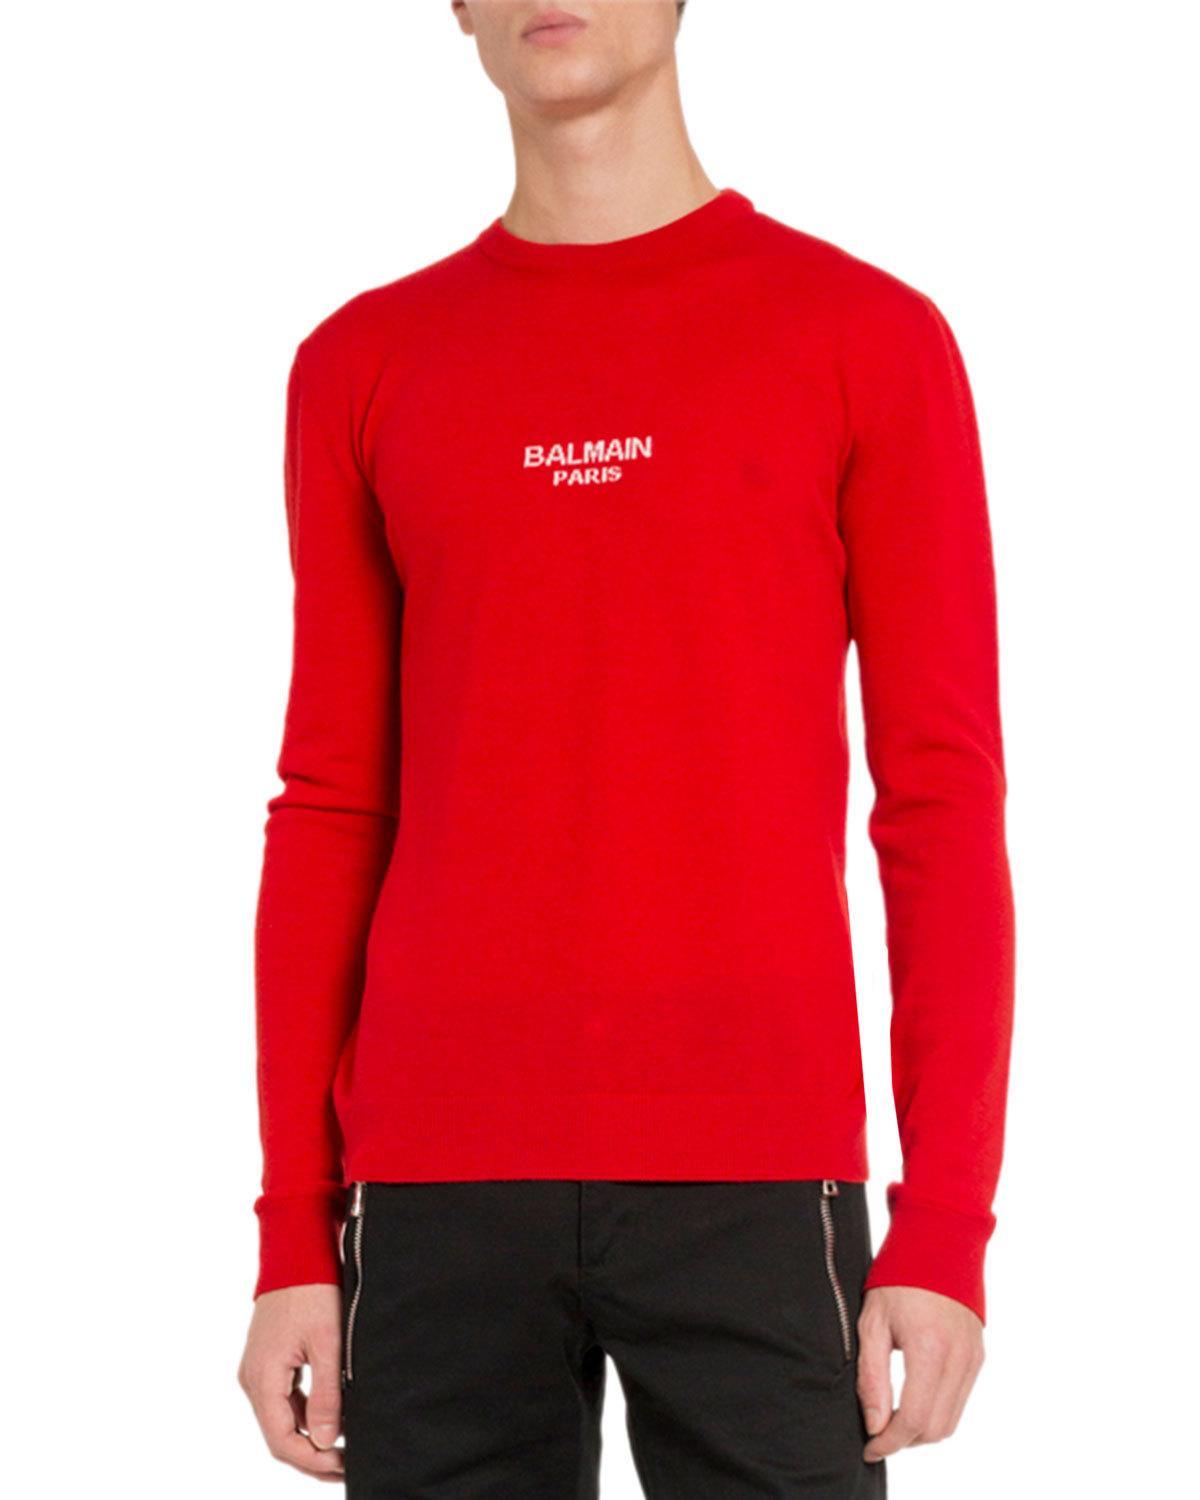 Balmain Wool Logo Knitted Jumper in Red for Men - Save 32% - Lyst